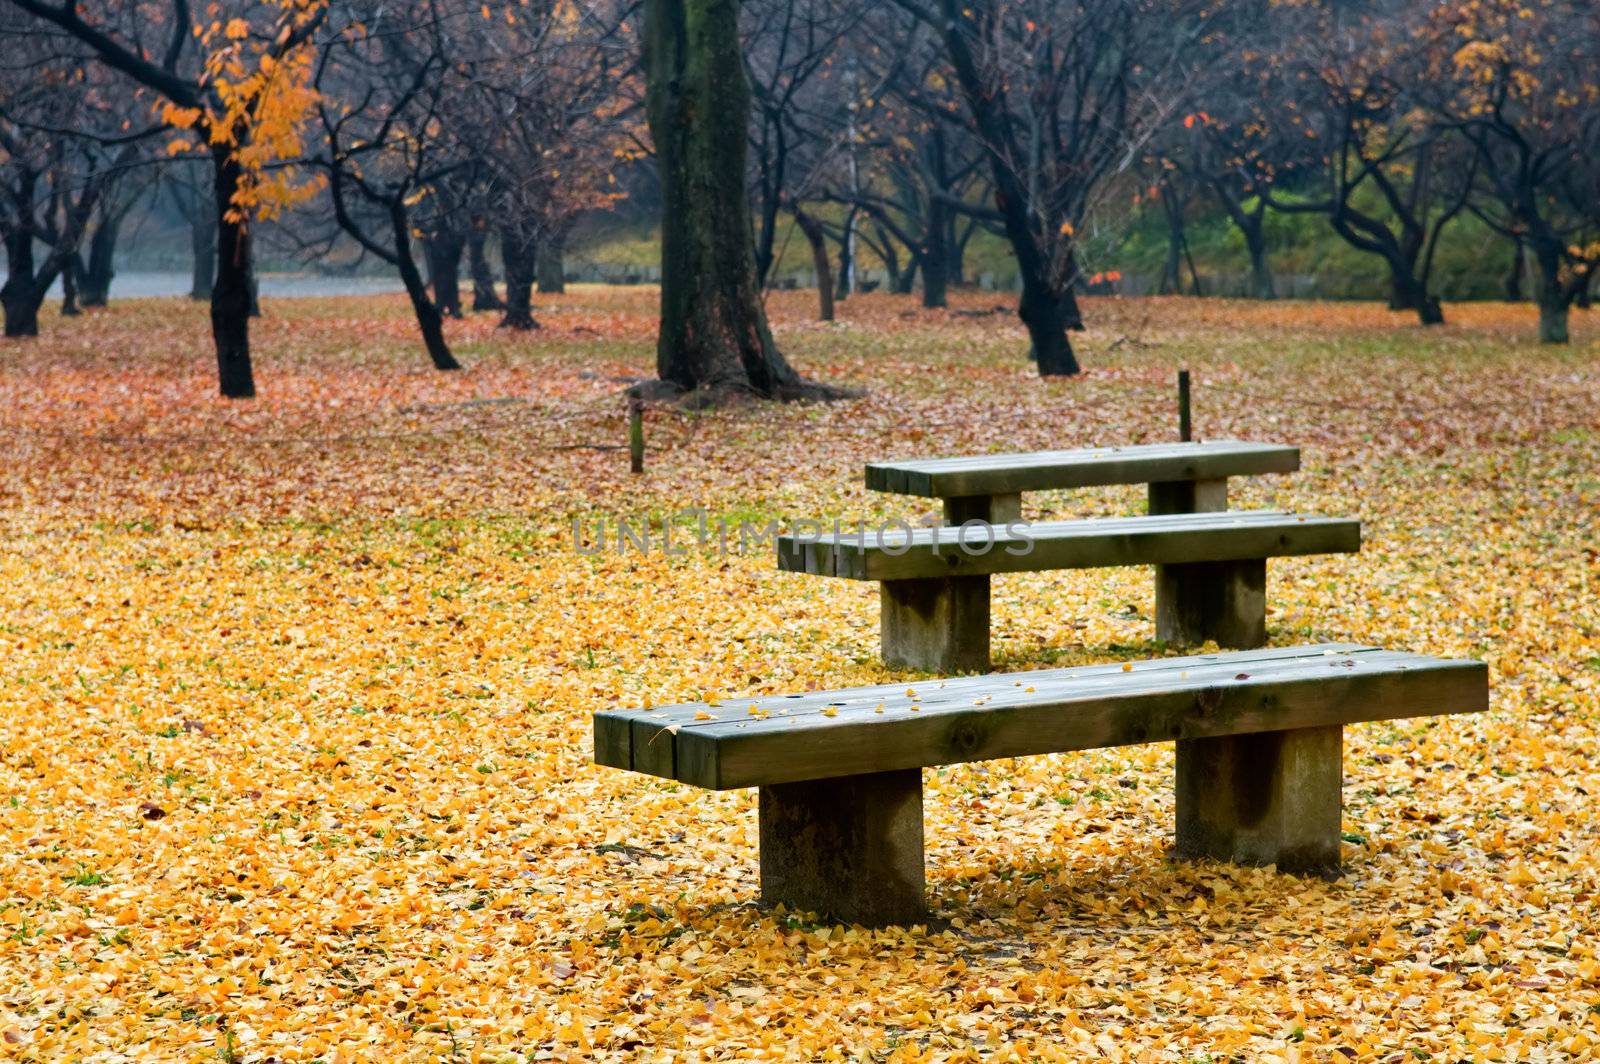 The view of seat with fallen leafs in garden